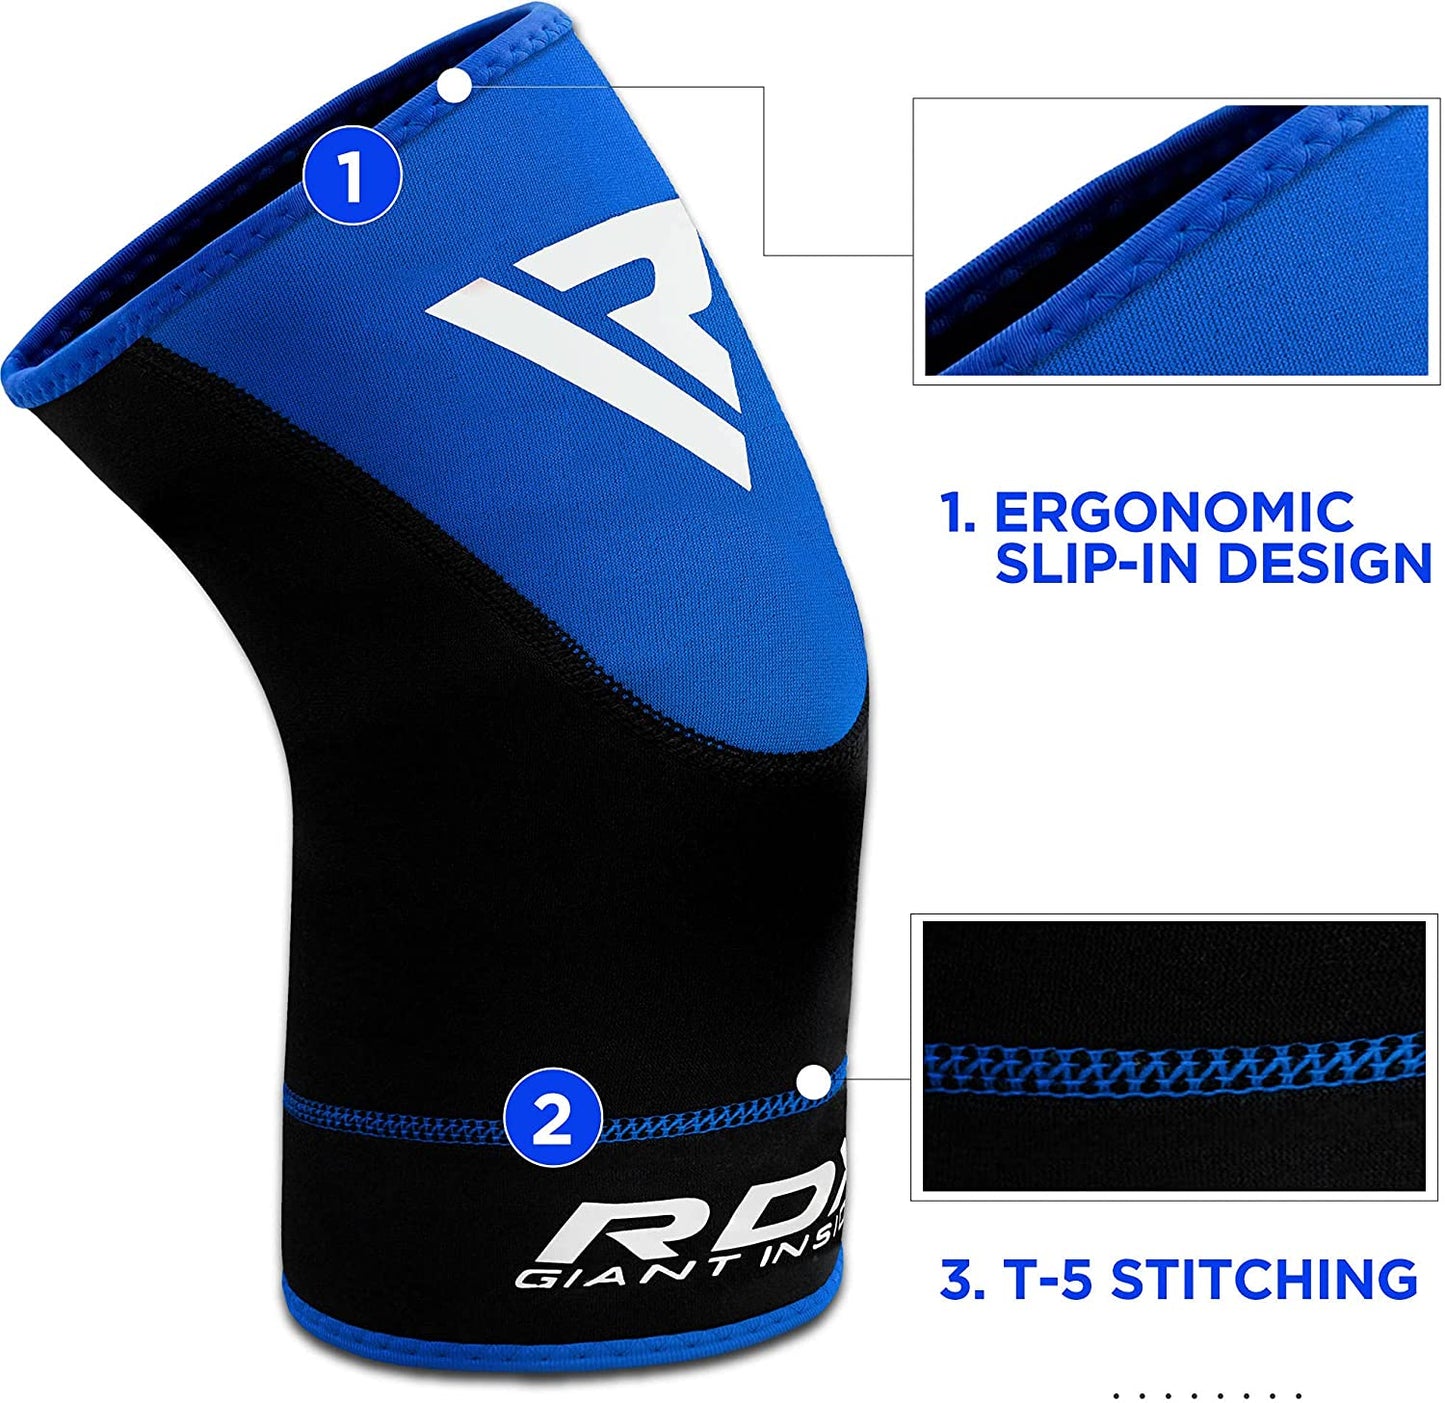 RDX Knee Support Brace for, Compression Sleeve for Sports, Squats, Running, Weightlifting, Neoprene Protector, Pain Relief. SOLD AS SINGLE ITEM